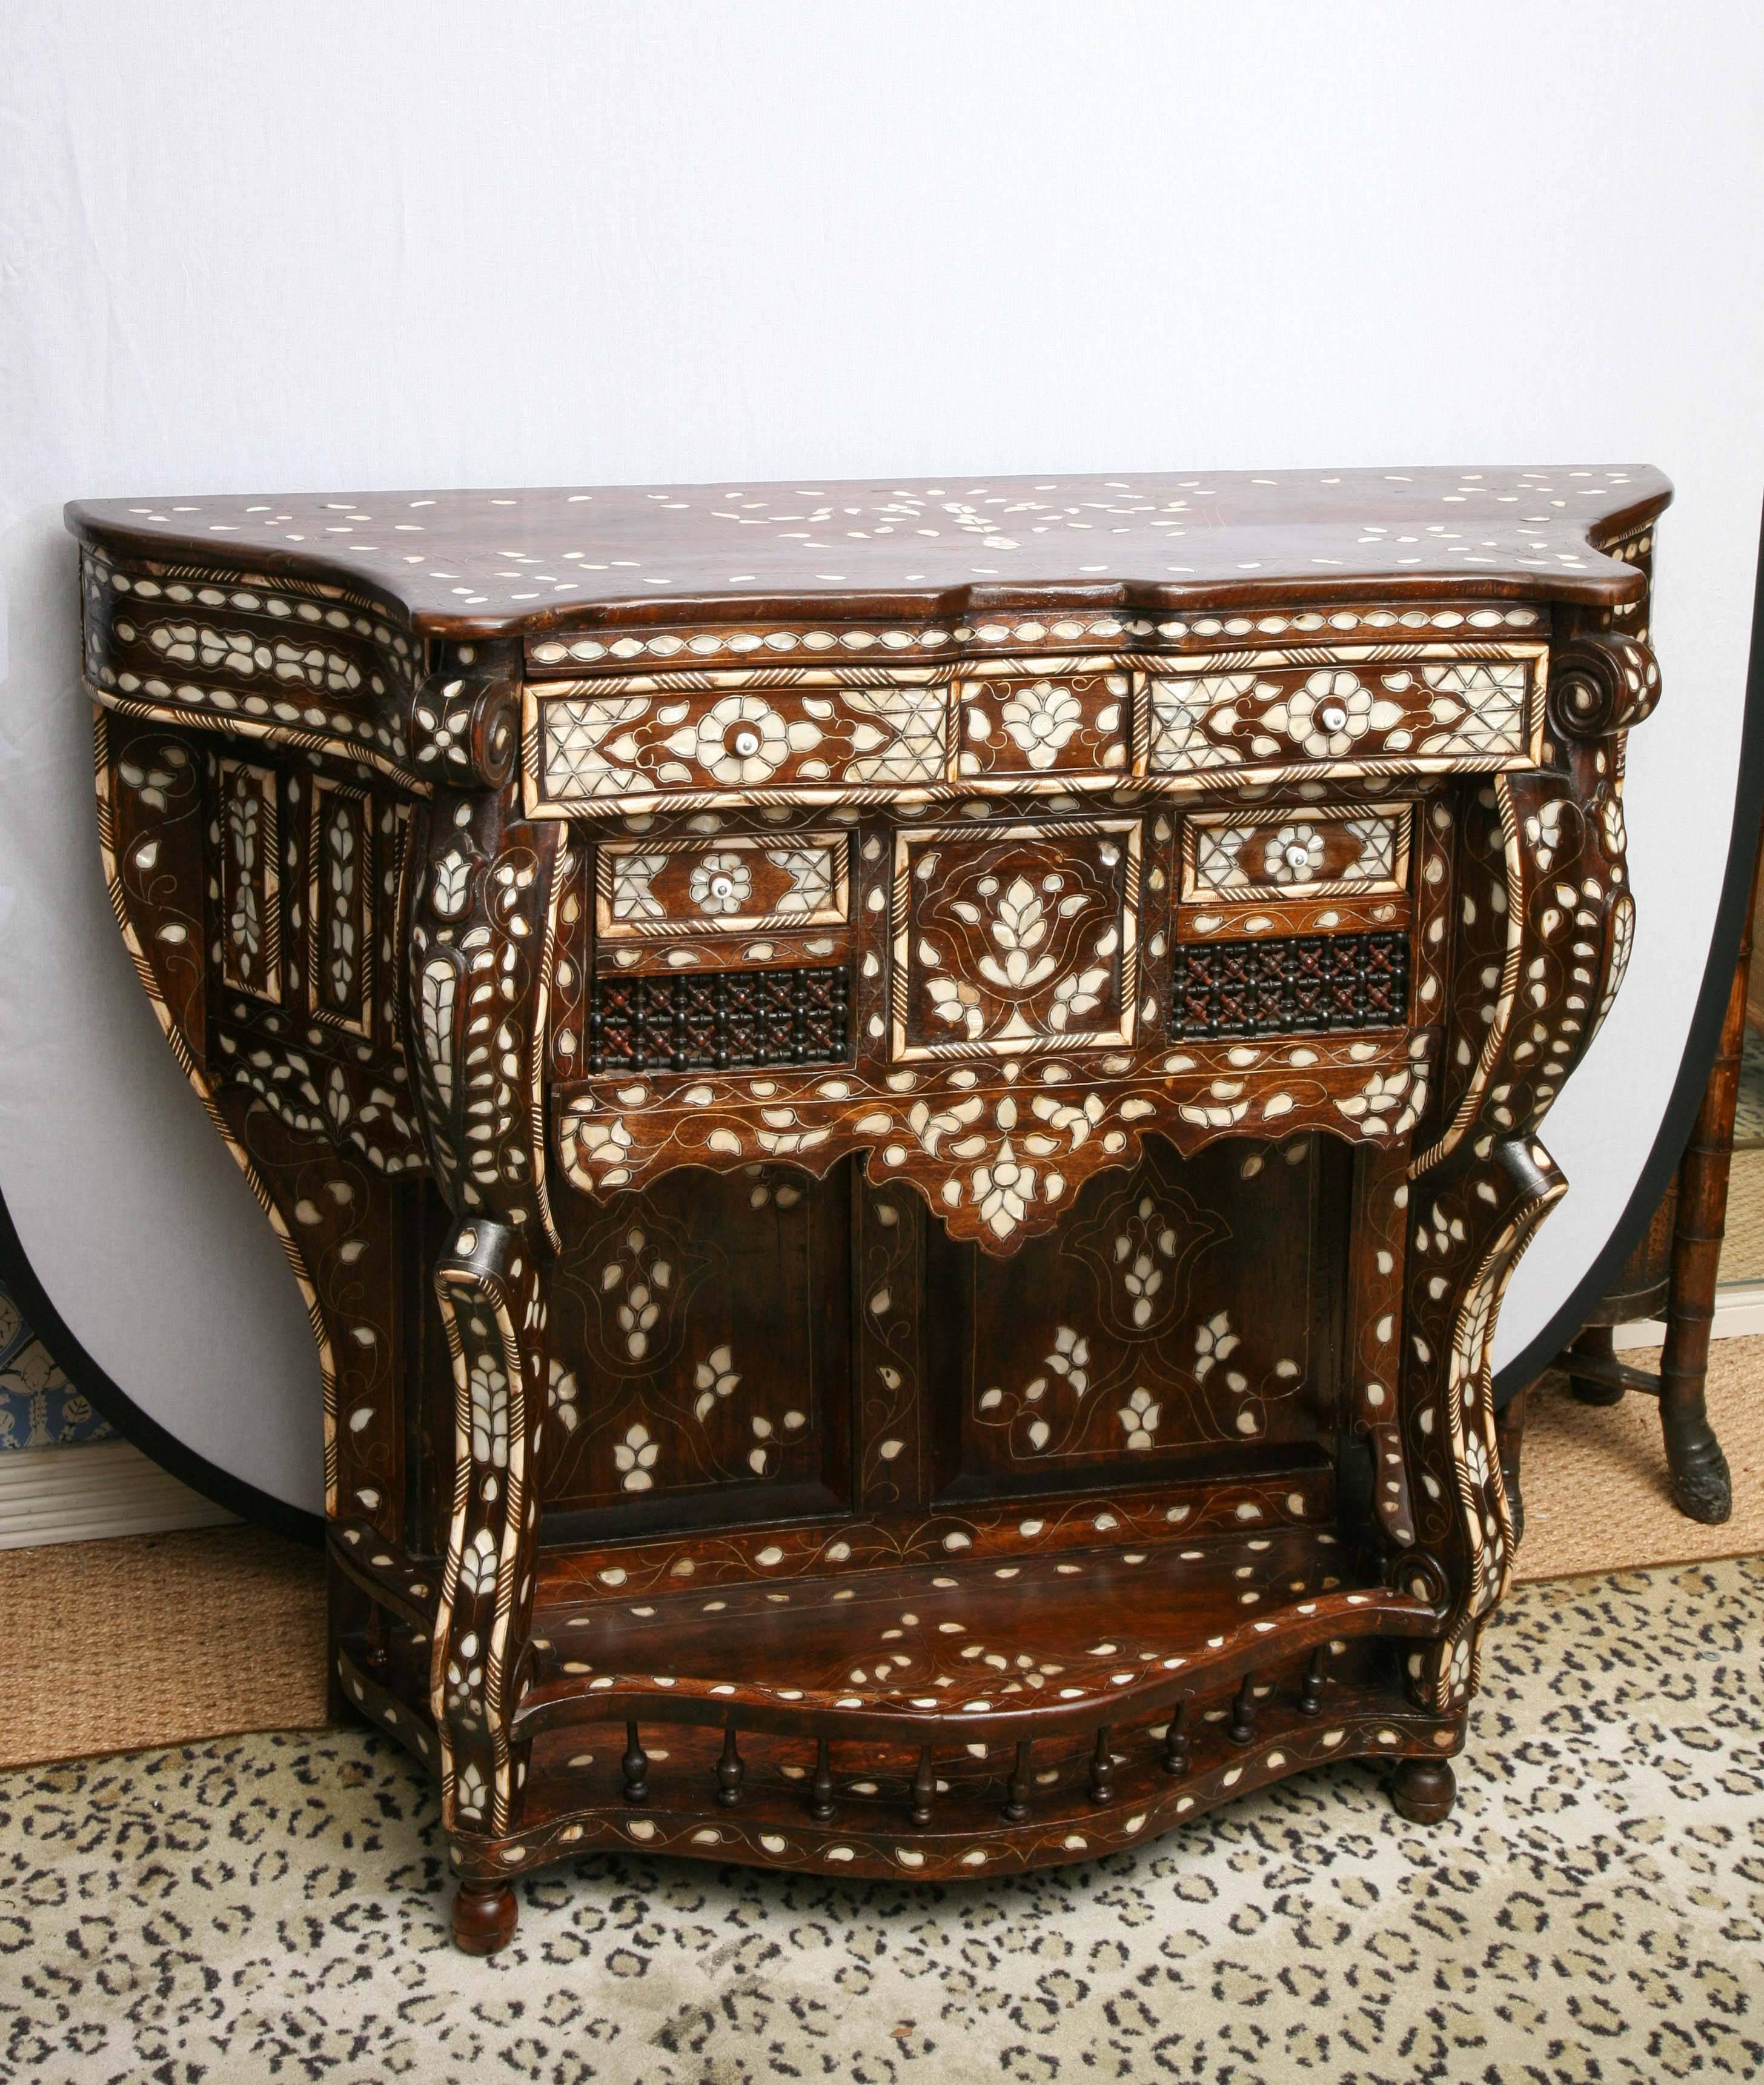 
Superb Syrian mother-of-pearl inlaid console, the shaped top inlaid with floral tendrils, surmounting the conforming case having one over two drawers with ball and spindle detailing and shaped pendant apron rising on C-scroll legs conjoined by a